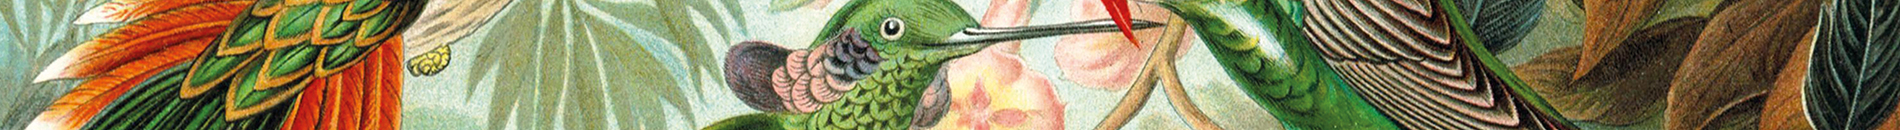 Cut-out of the Art of Nature print depicting hummingbirds and all kinds of greenery.